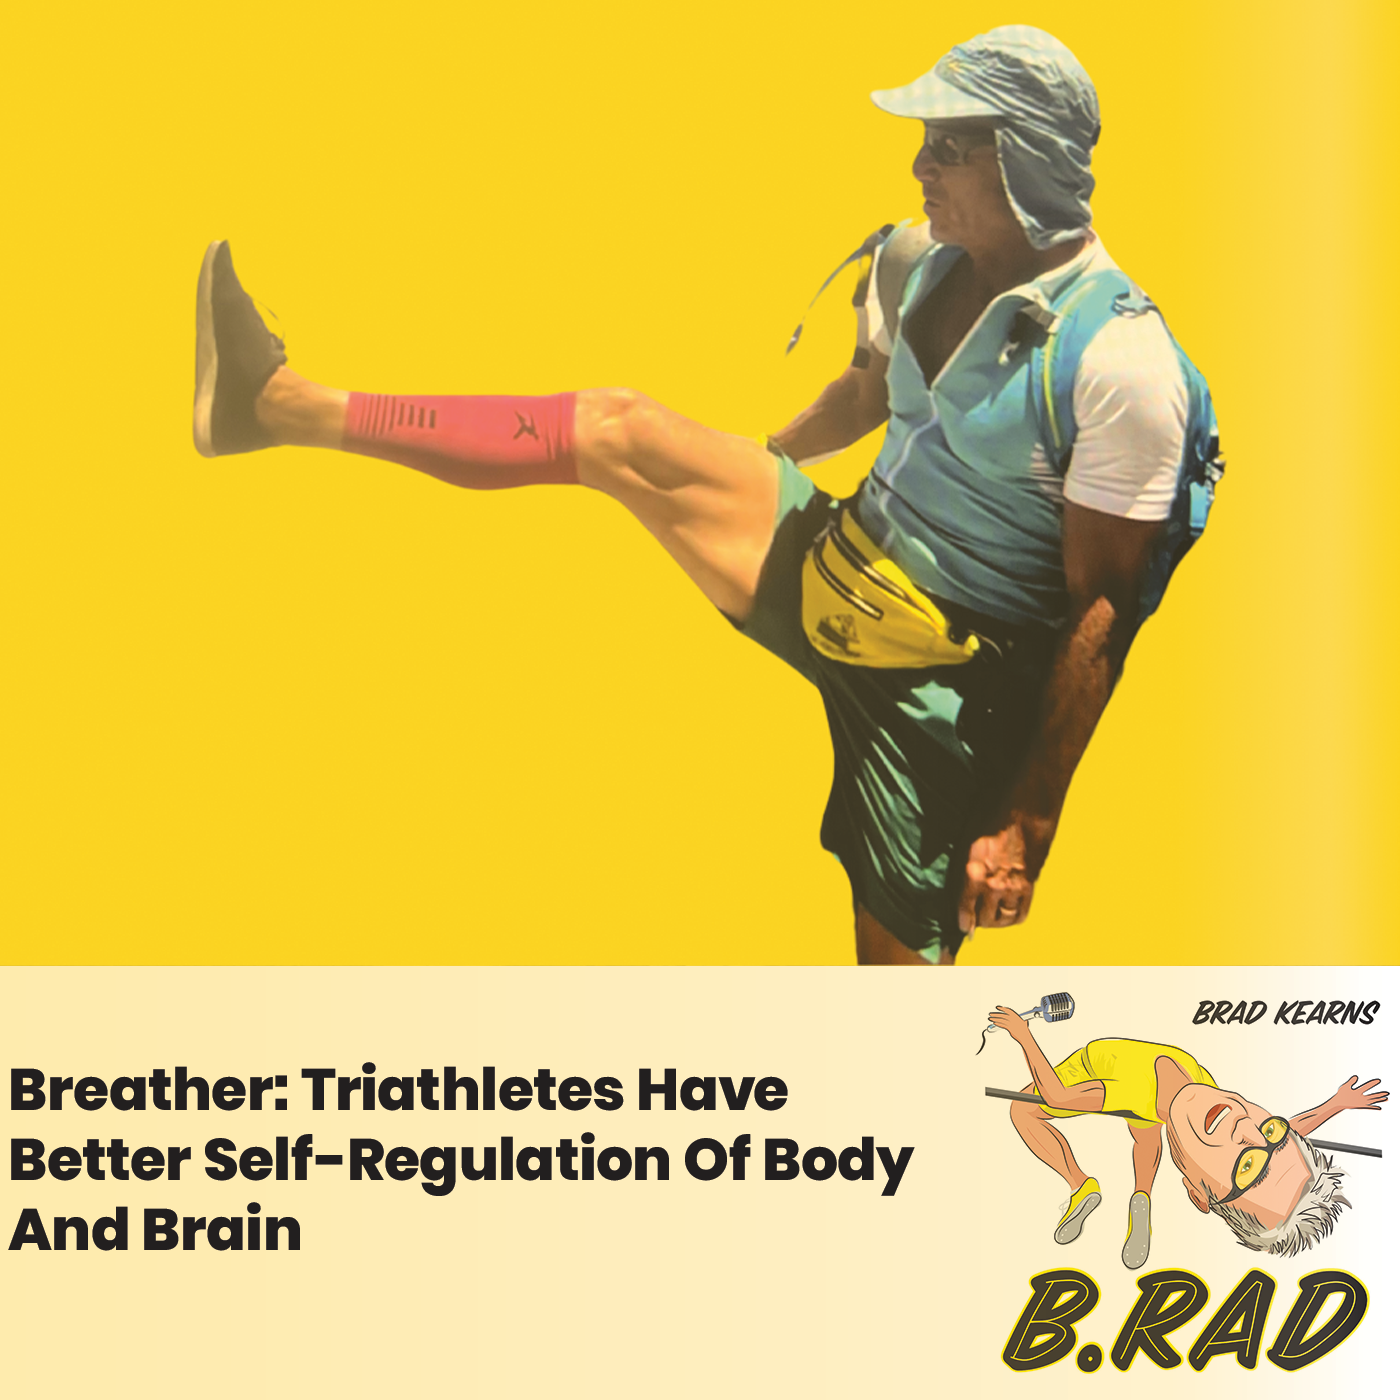 Breather: Triathletes Have Better Self-Regulation Of Body And Brain